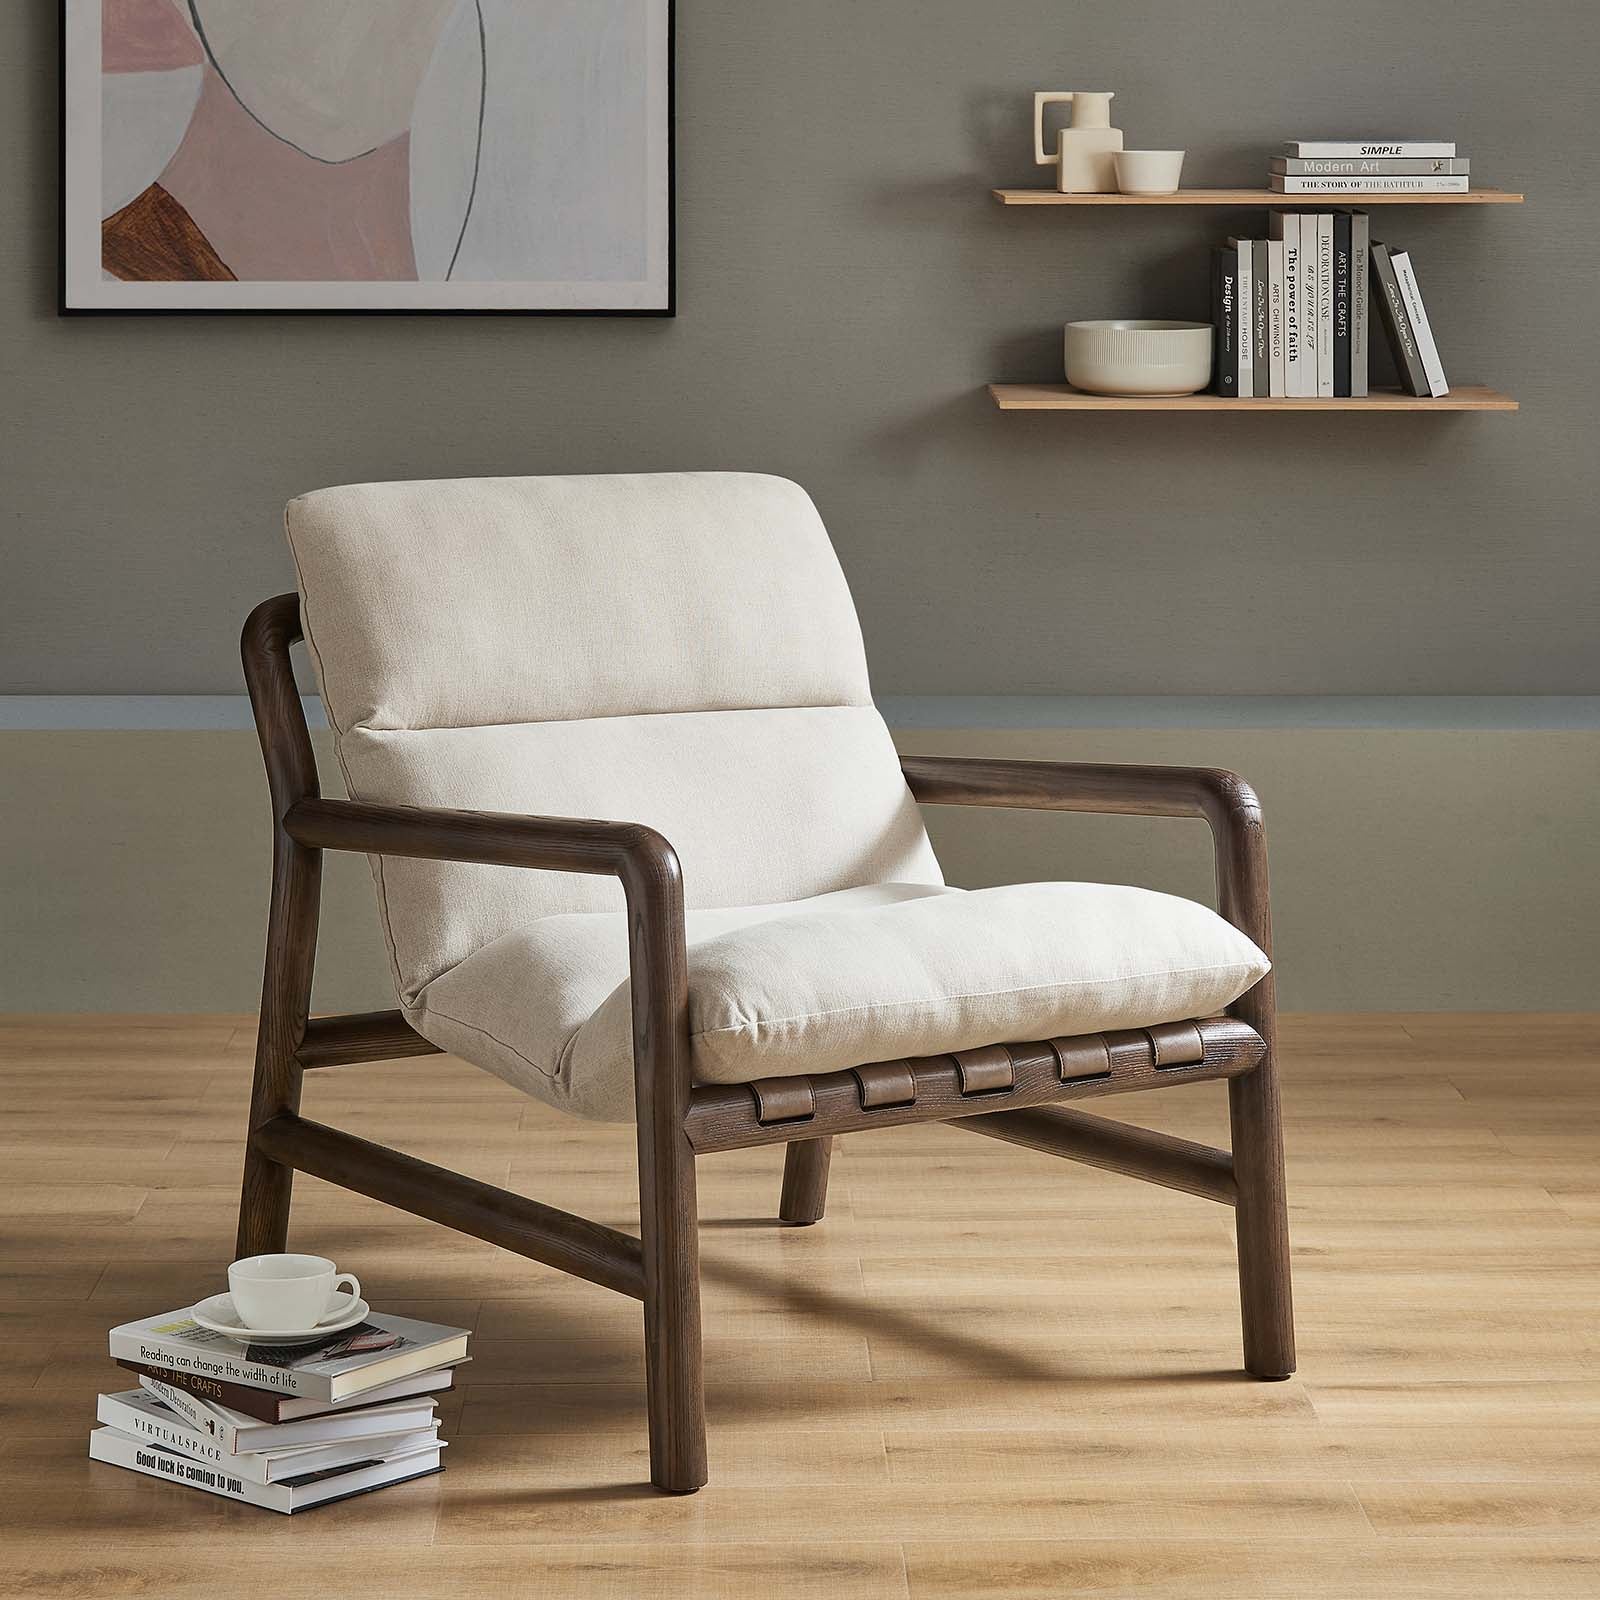 PAX WOOD SLING CHAIR